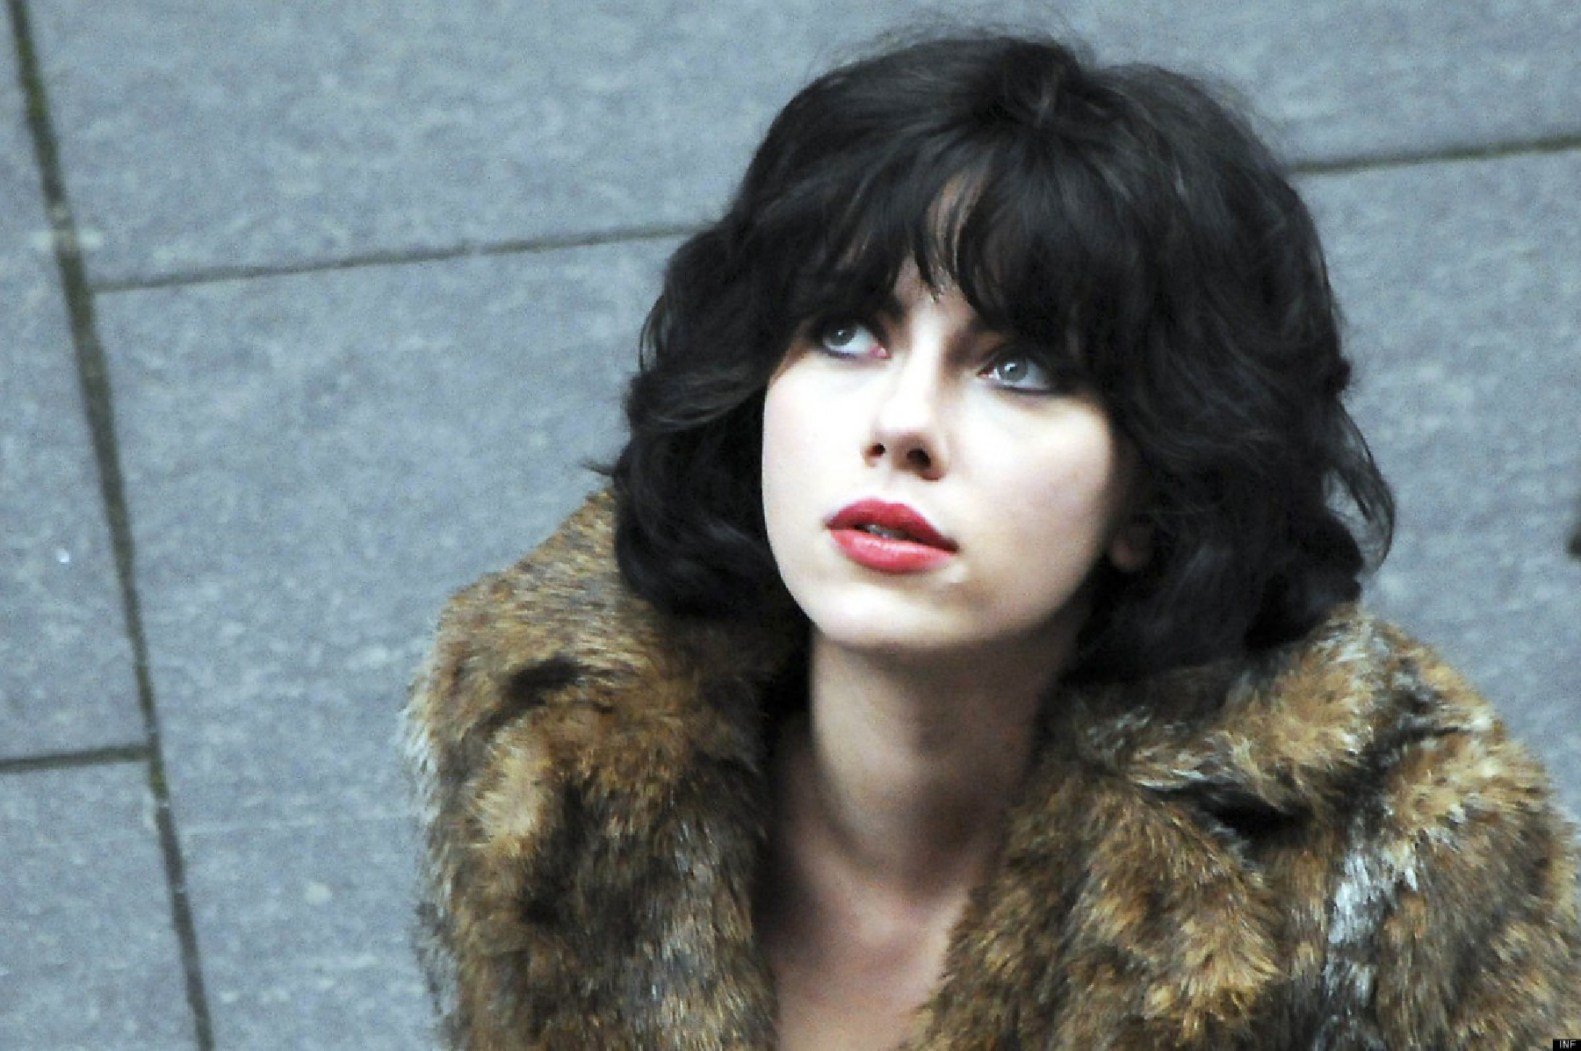 ahmad arshi recommends under the skin scarlett pics pic